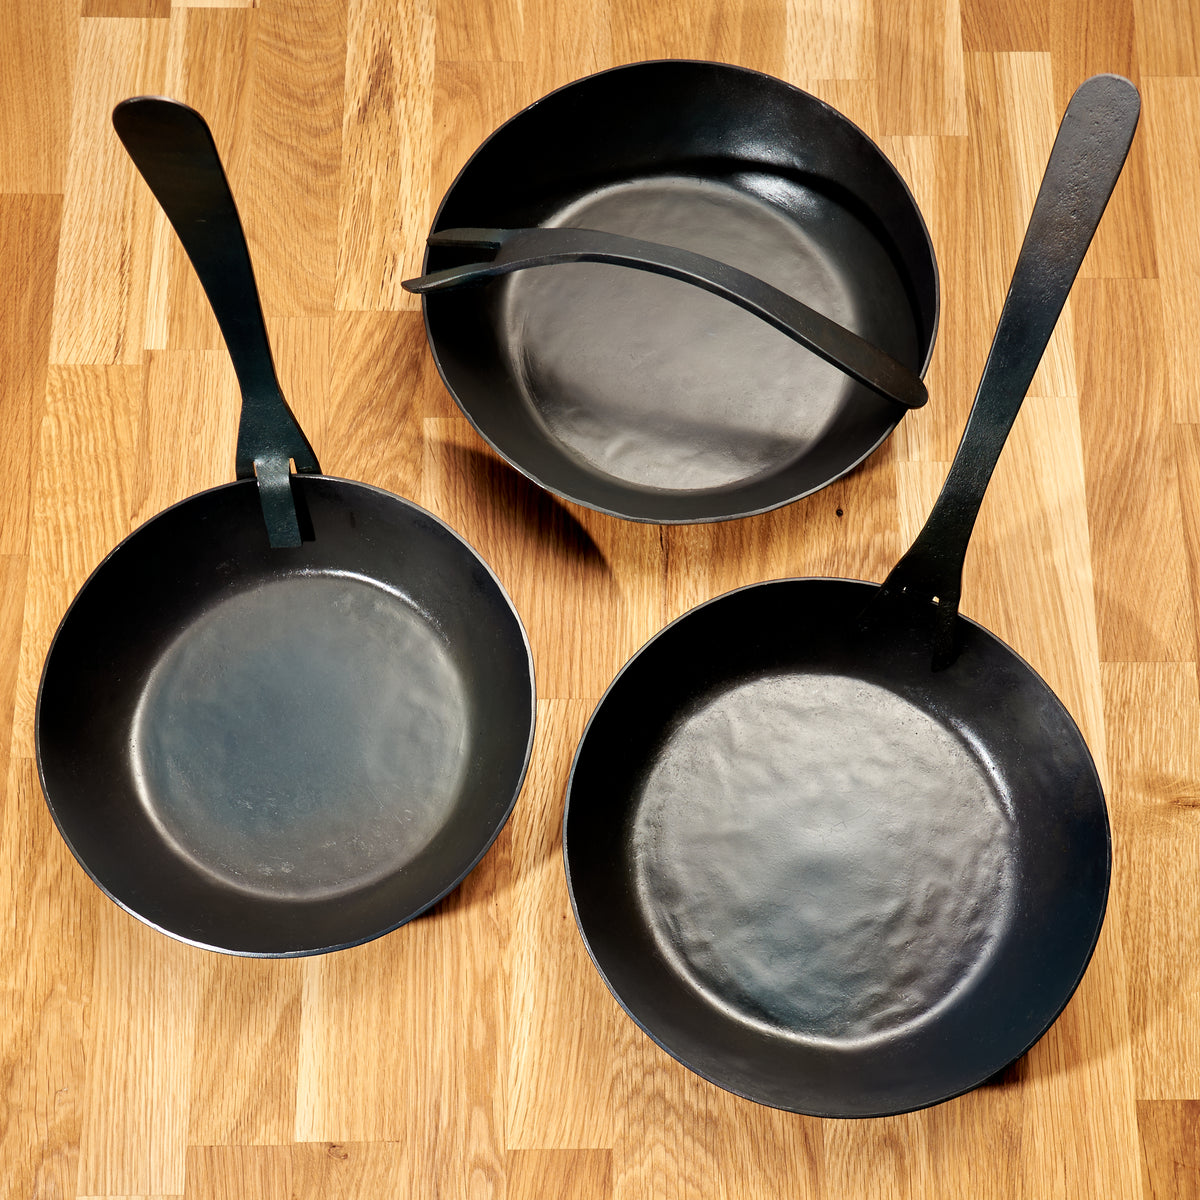 Carbon Steel With Removable Handle 8in Pan